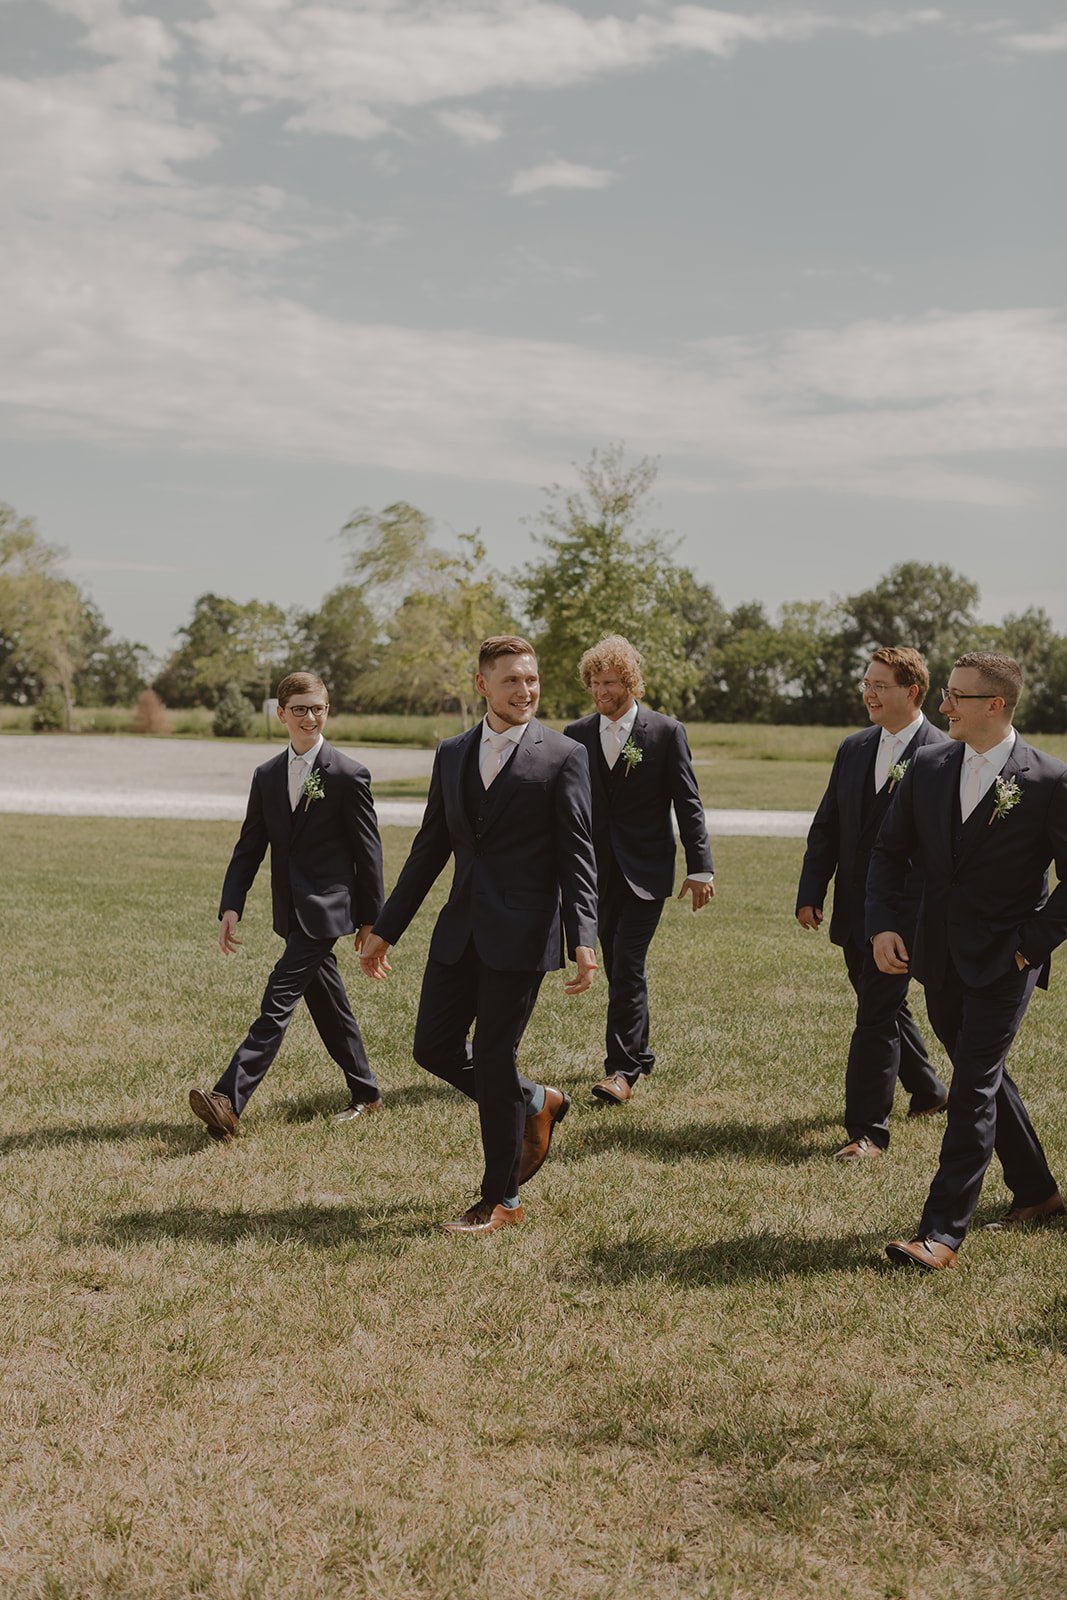 groomsmen suits relaxed candid wedding photo.jpg